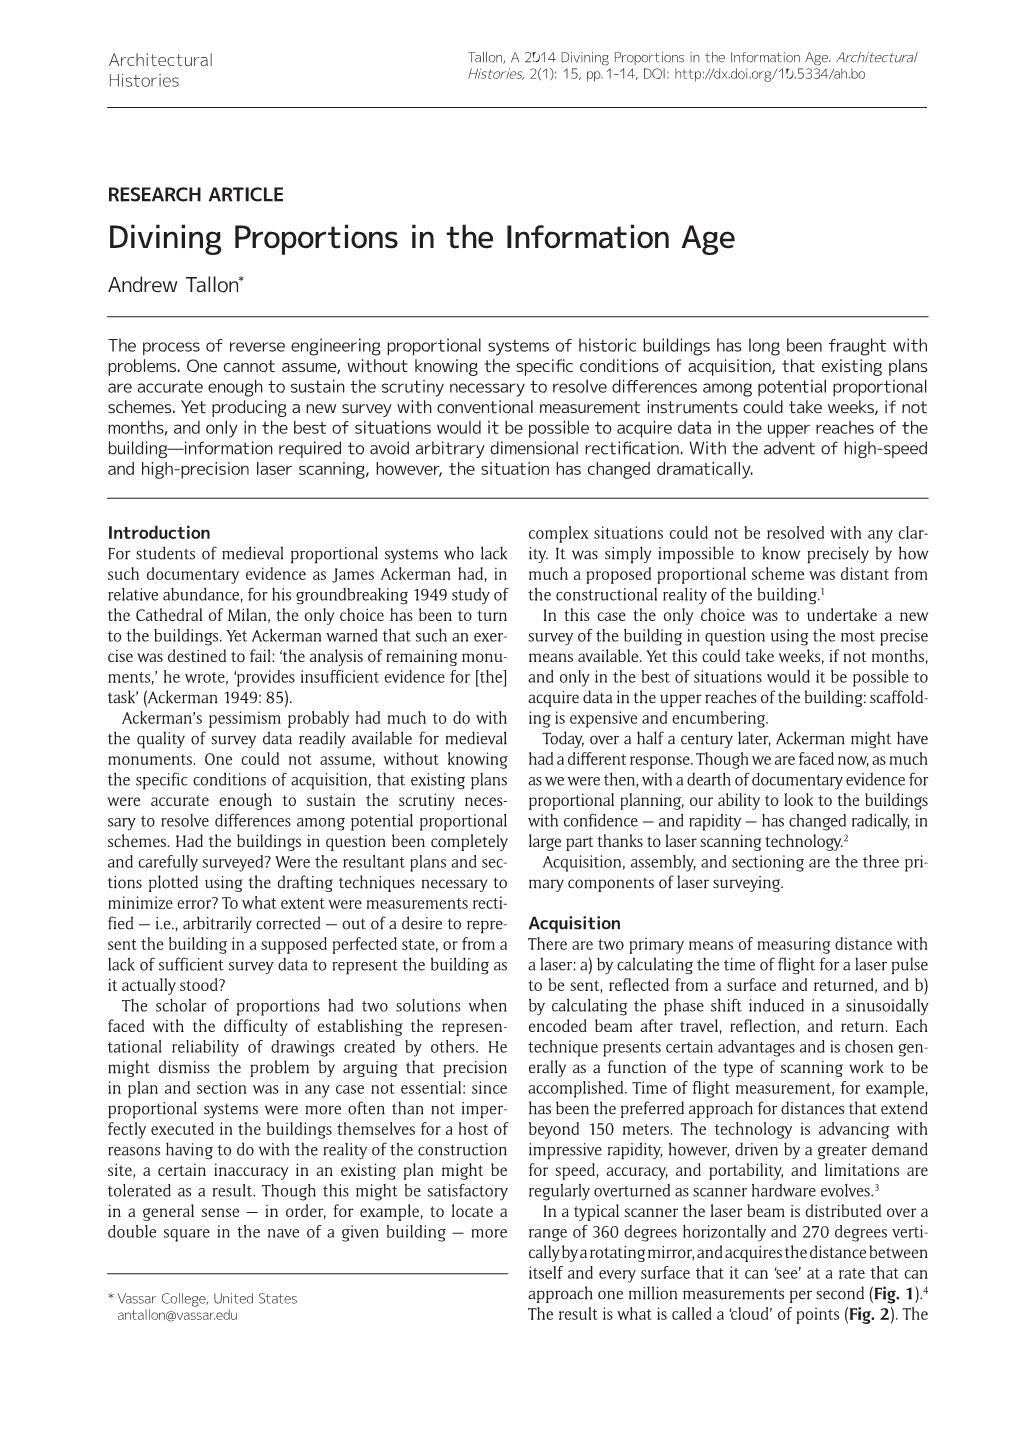 Divining Proportions in the Information Age